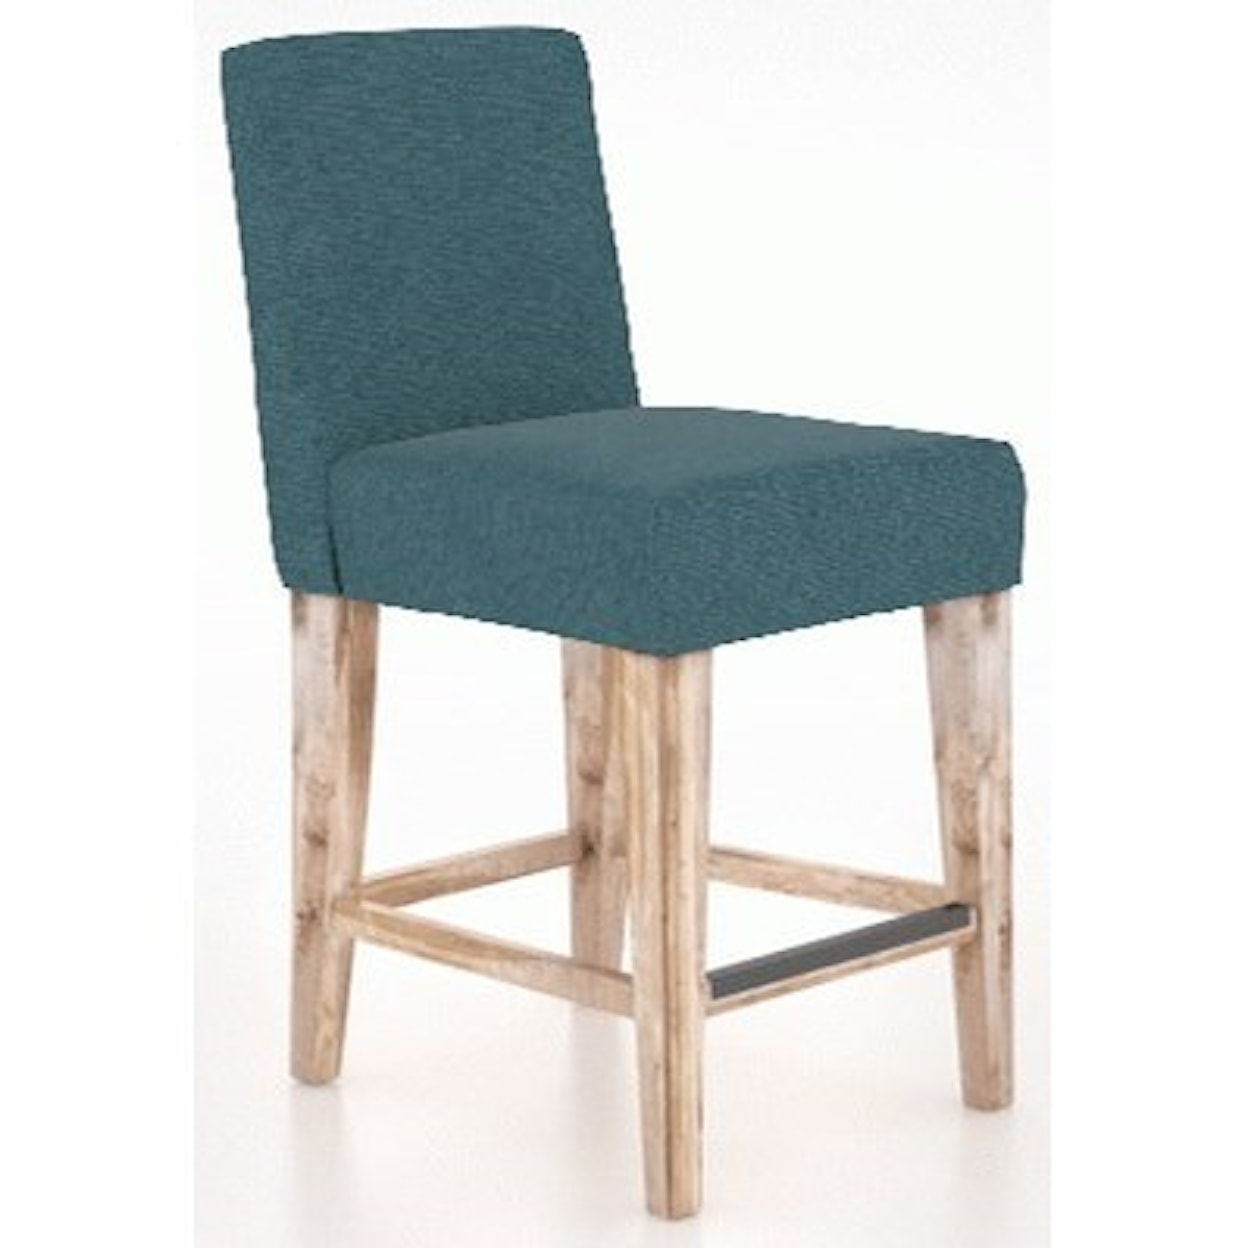 Canadel East Side Customizable Upholstered Stool